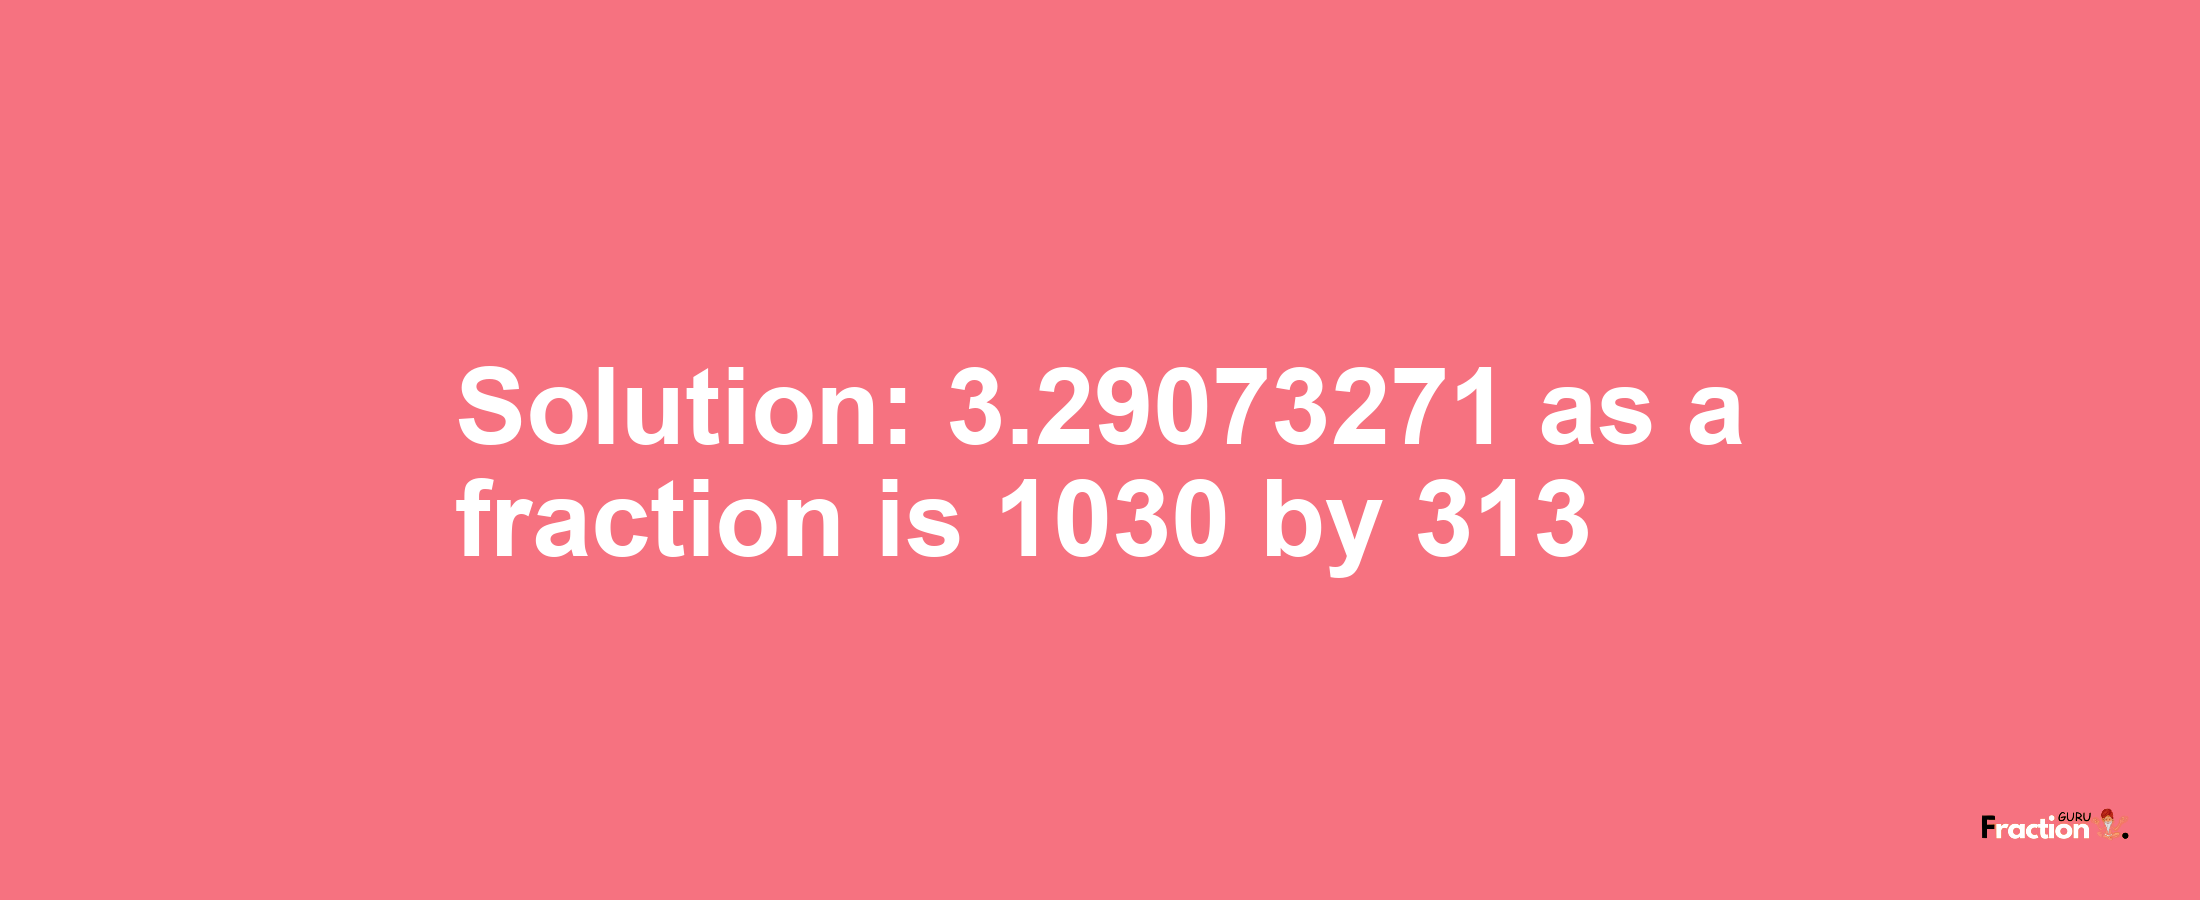 Solution:3.29073271 as a fraction is 1030/313